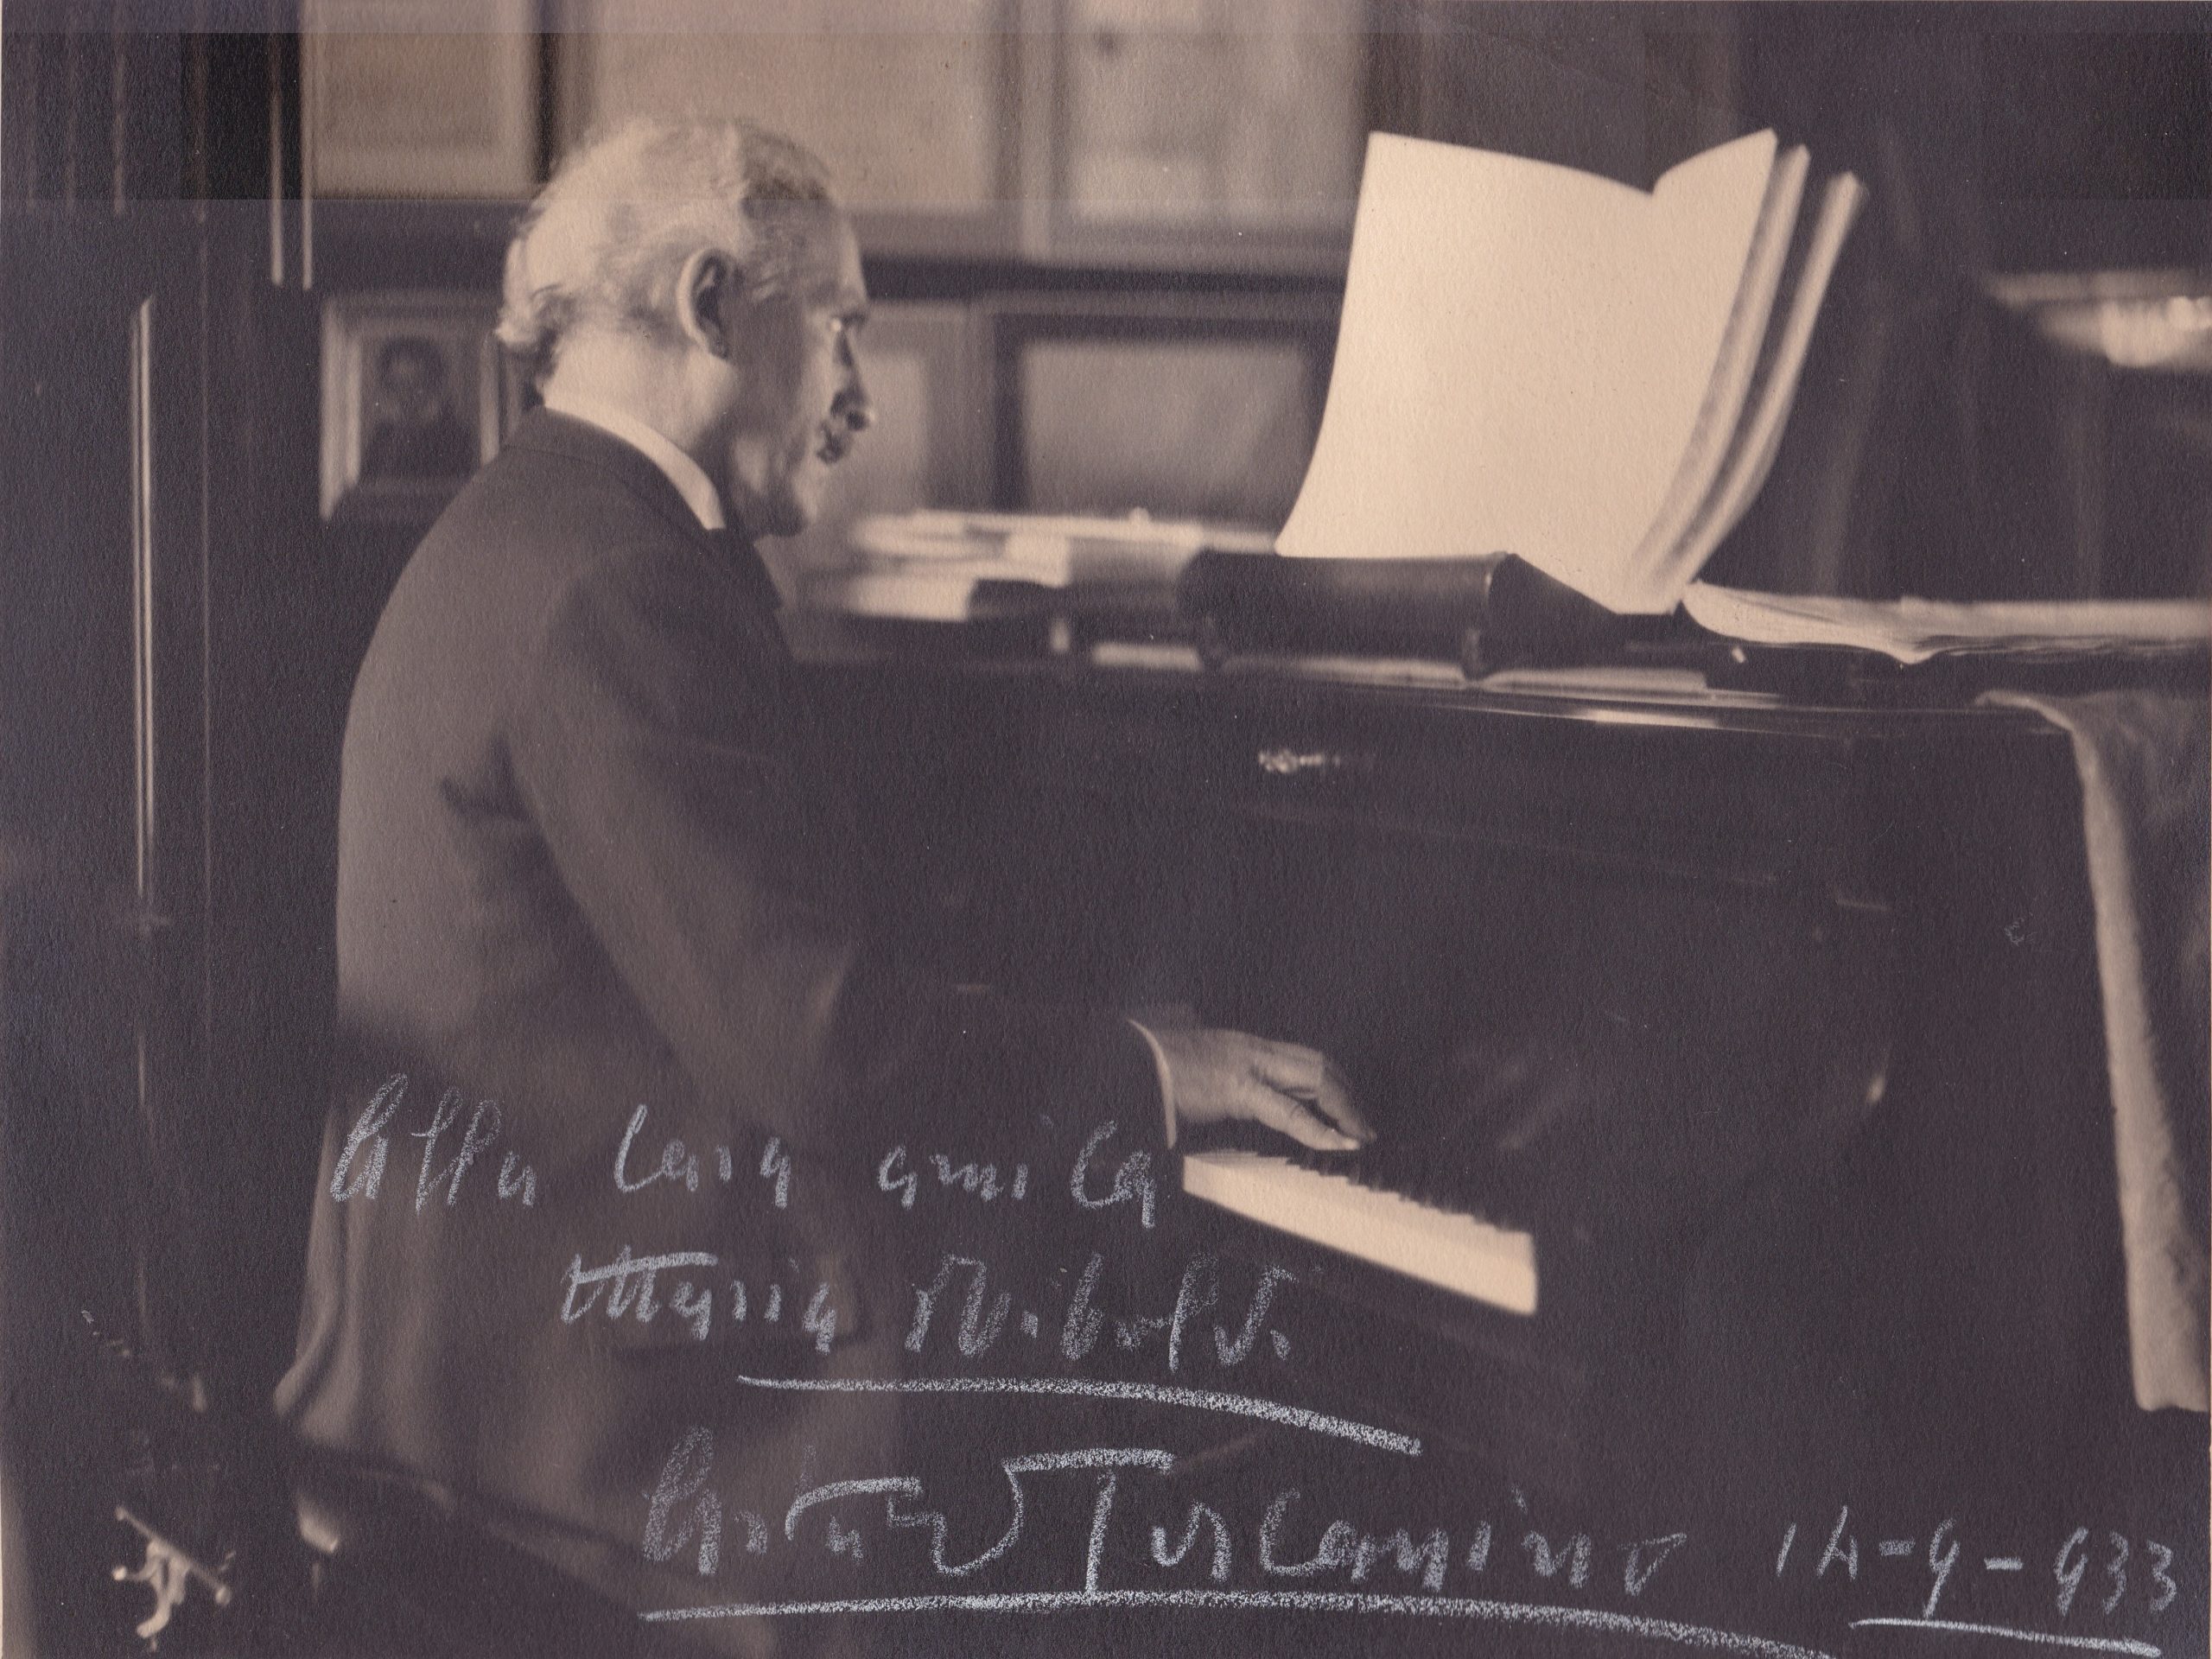 Toscanini in his letters